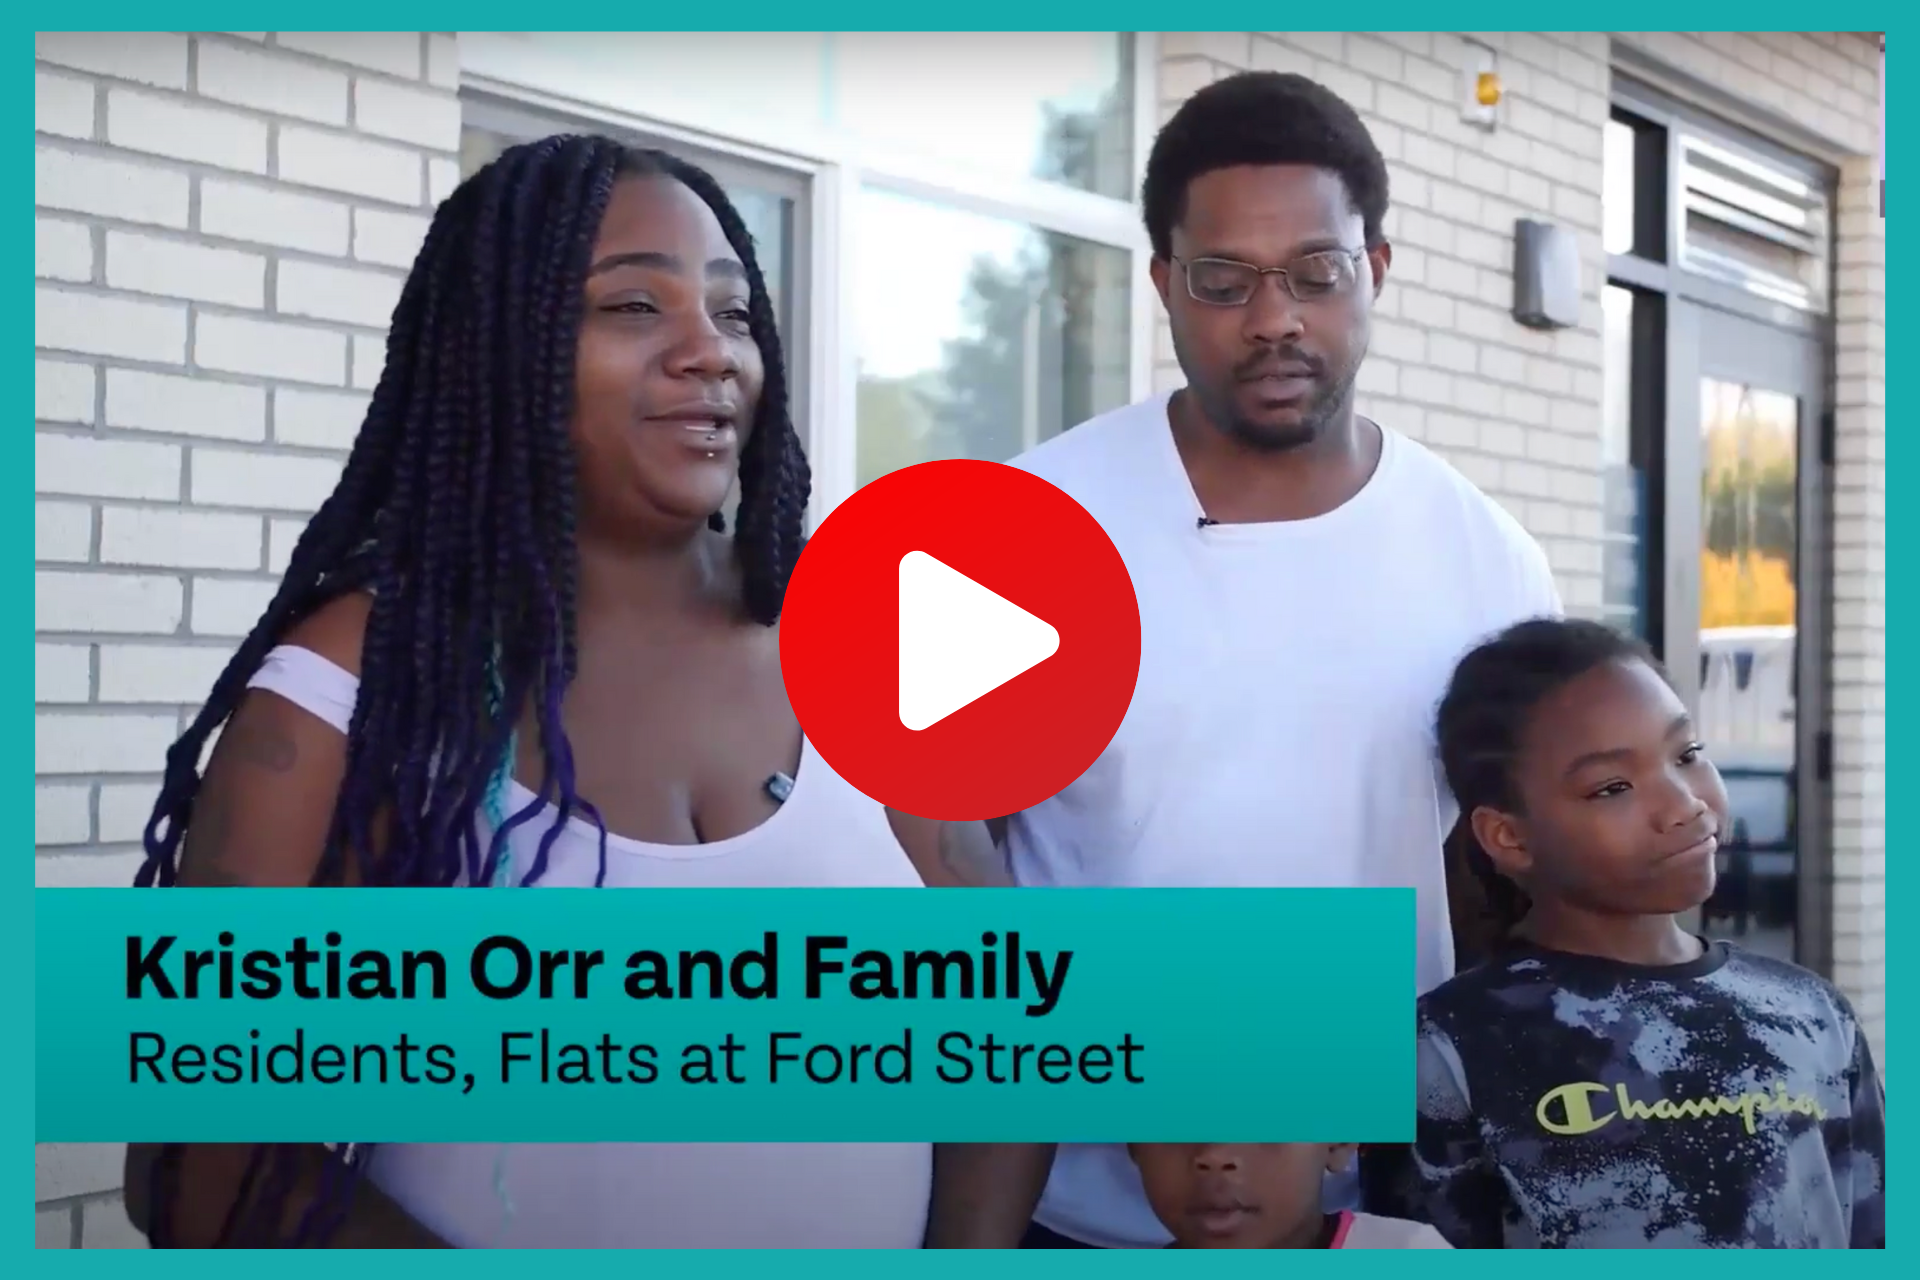 Two adults and a child standing together outside a building, with a play button indicating video content, and a caption introducing them as "Kristian Orr and Family, dispelling myths about affordable housing, residents